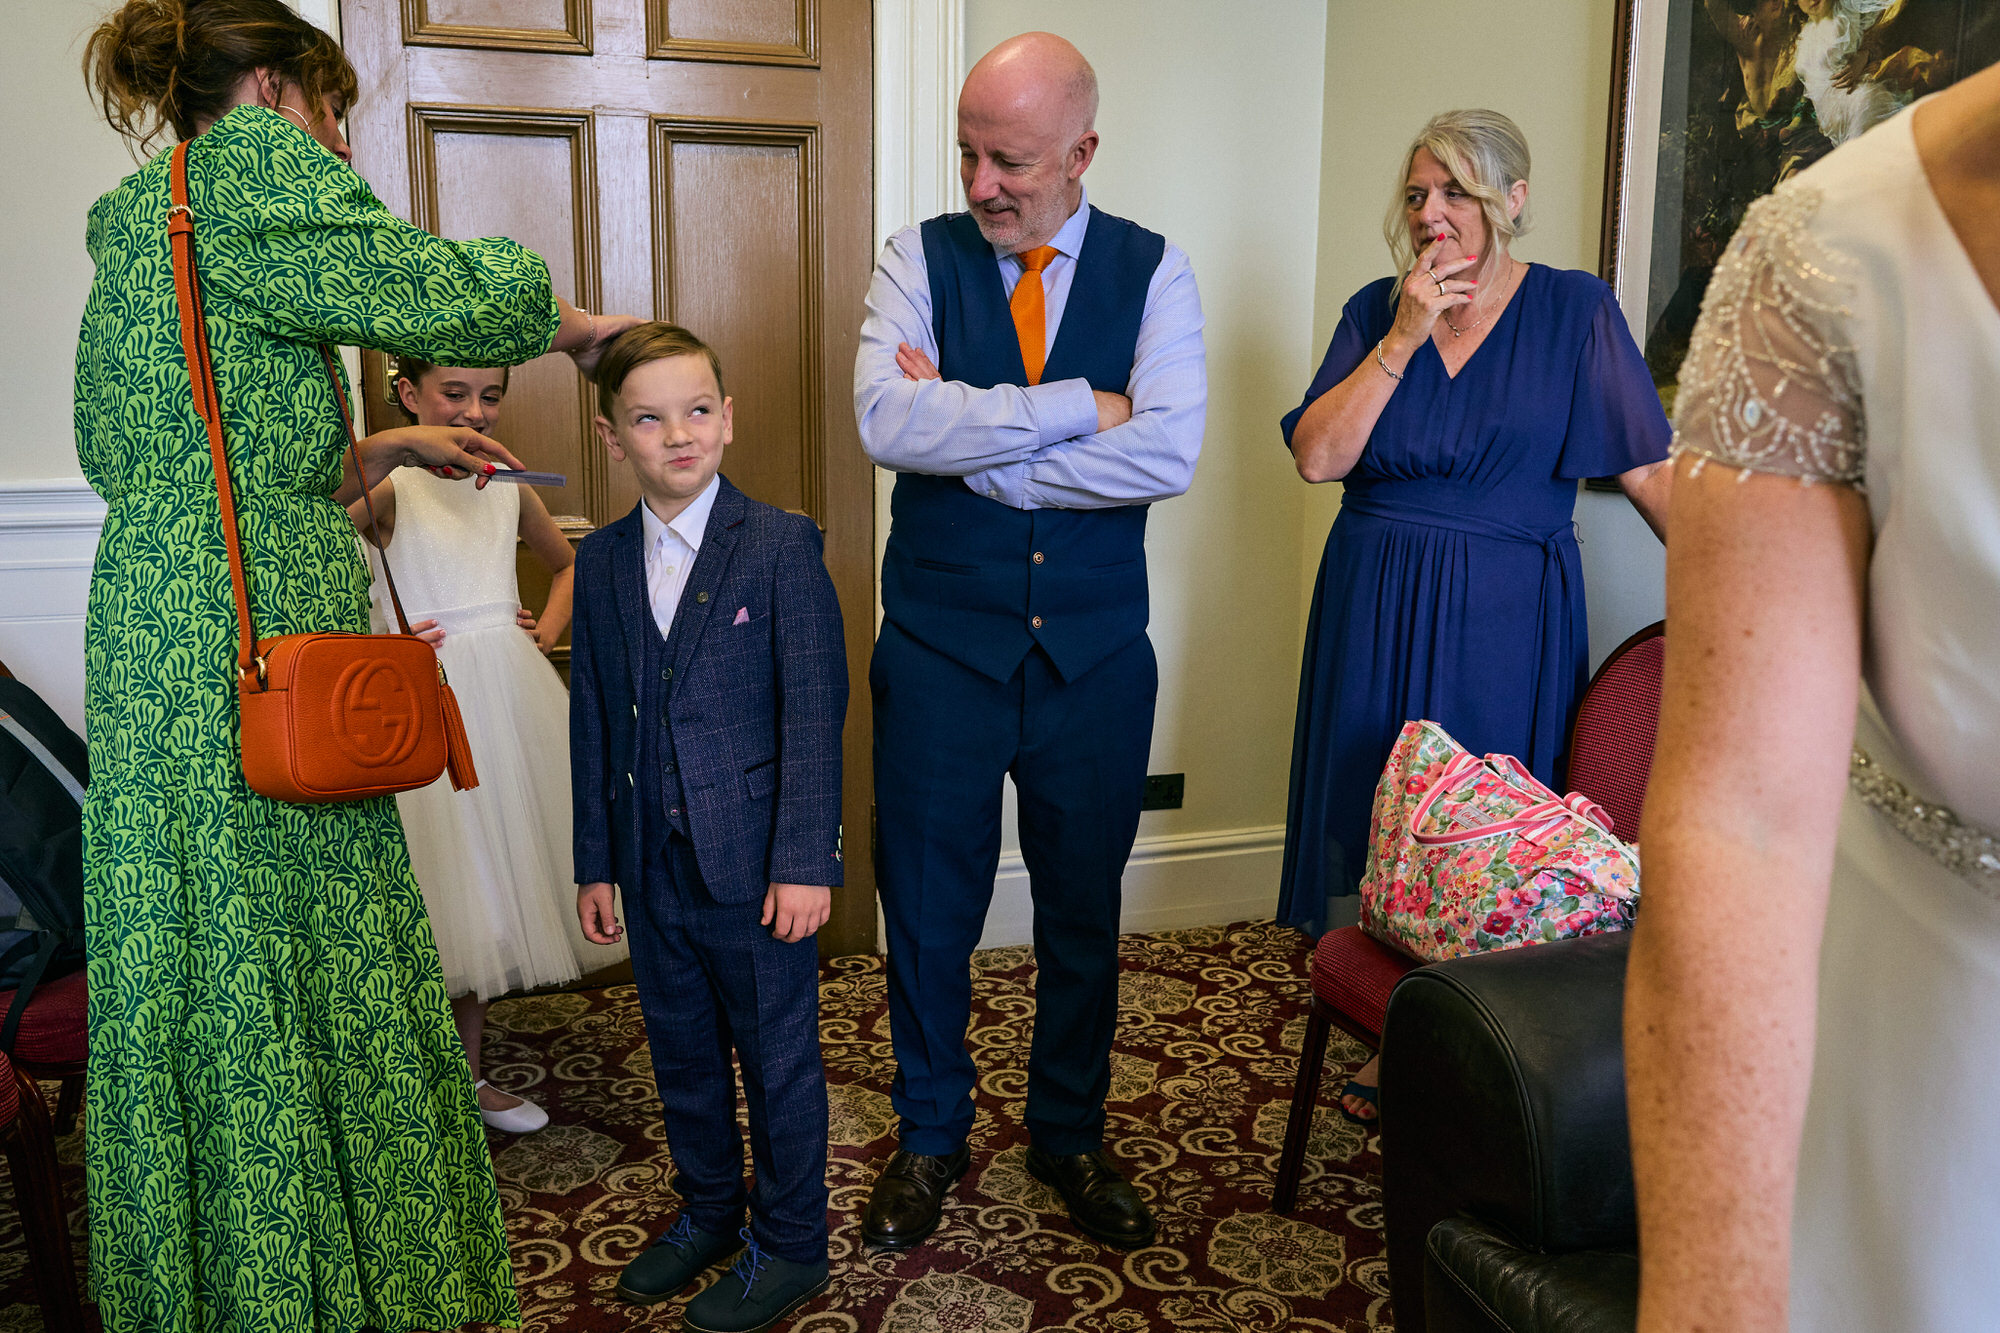 guests tease a page boy before the wedding ceremony at St Georges Hall in Liverpool